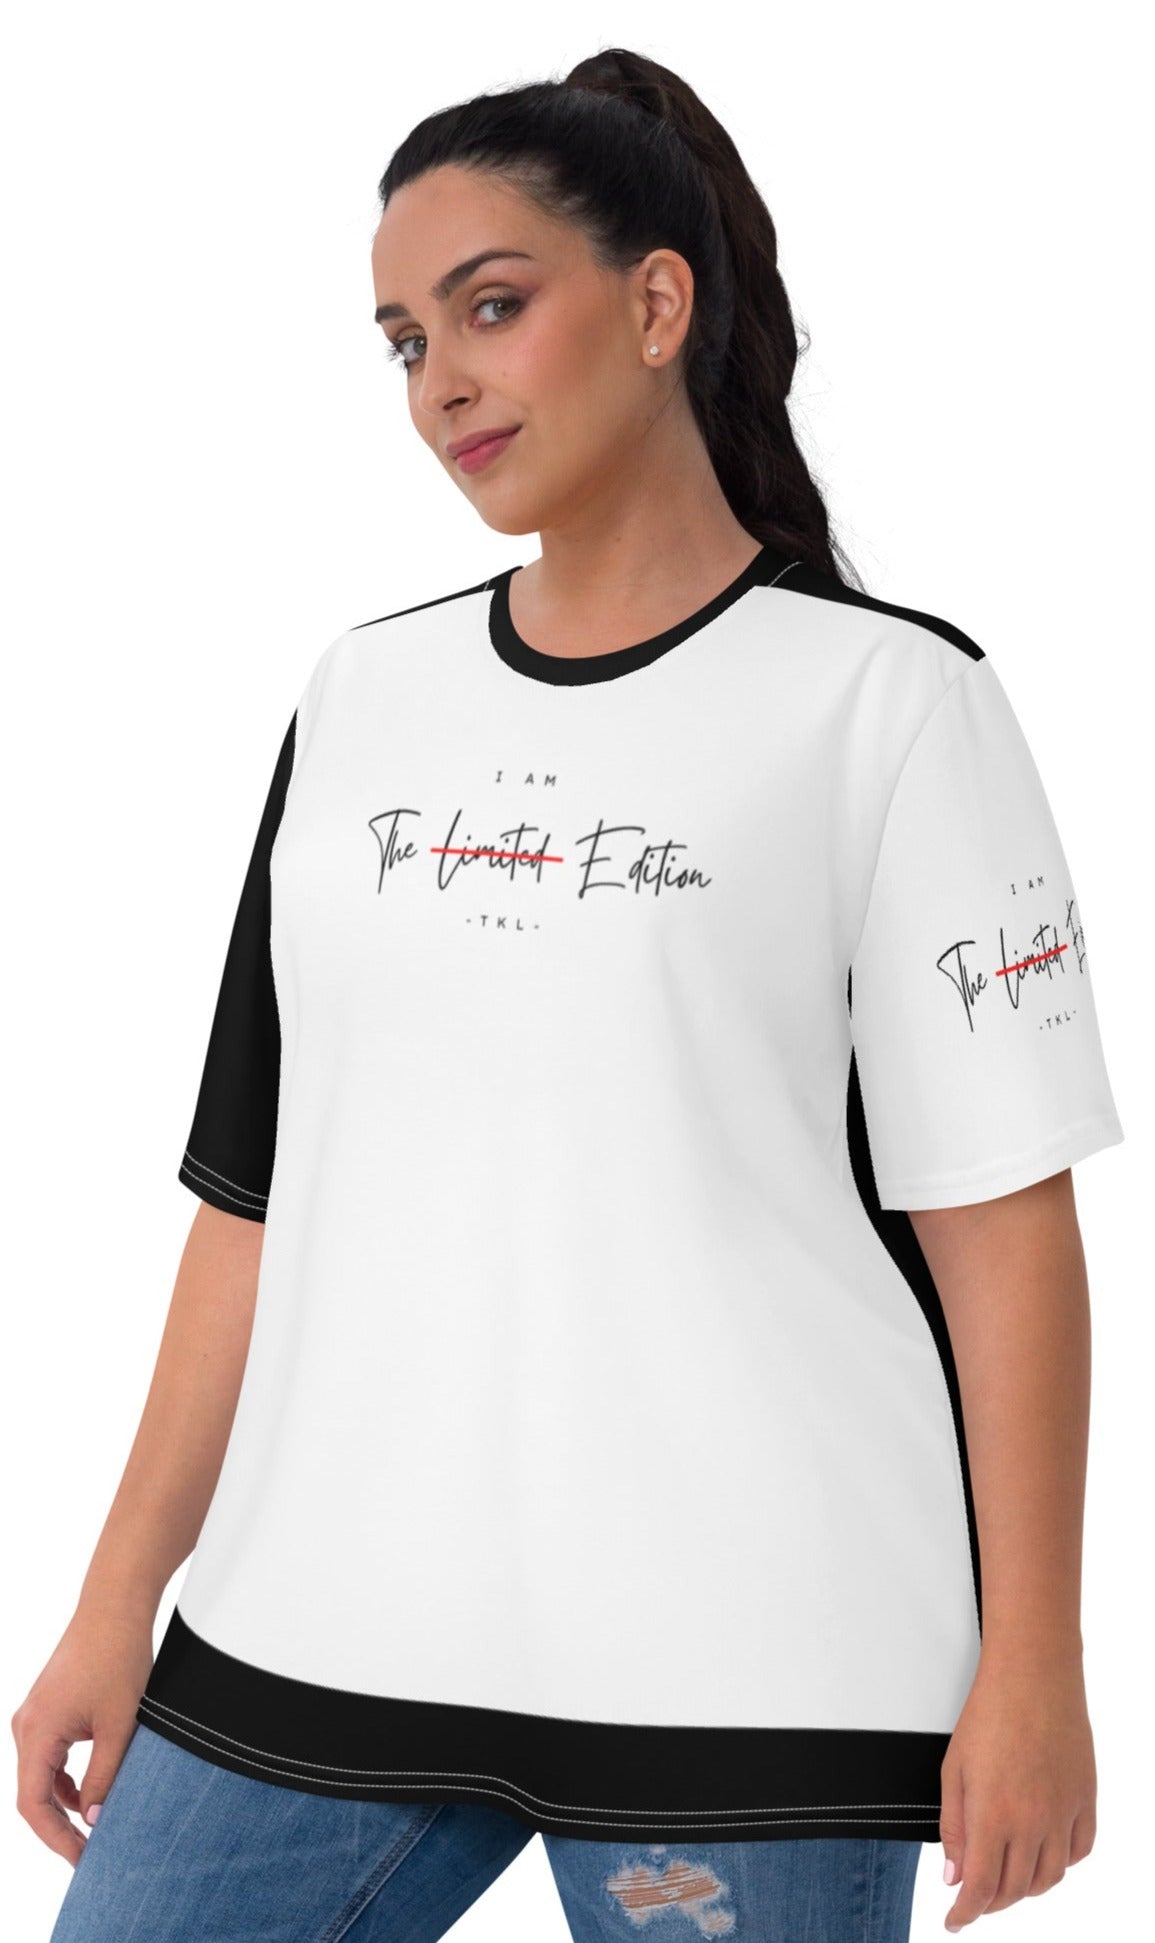 Limited-Edition Female Jersey Tee (XS-2XL)